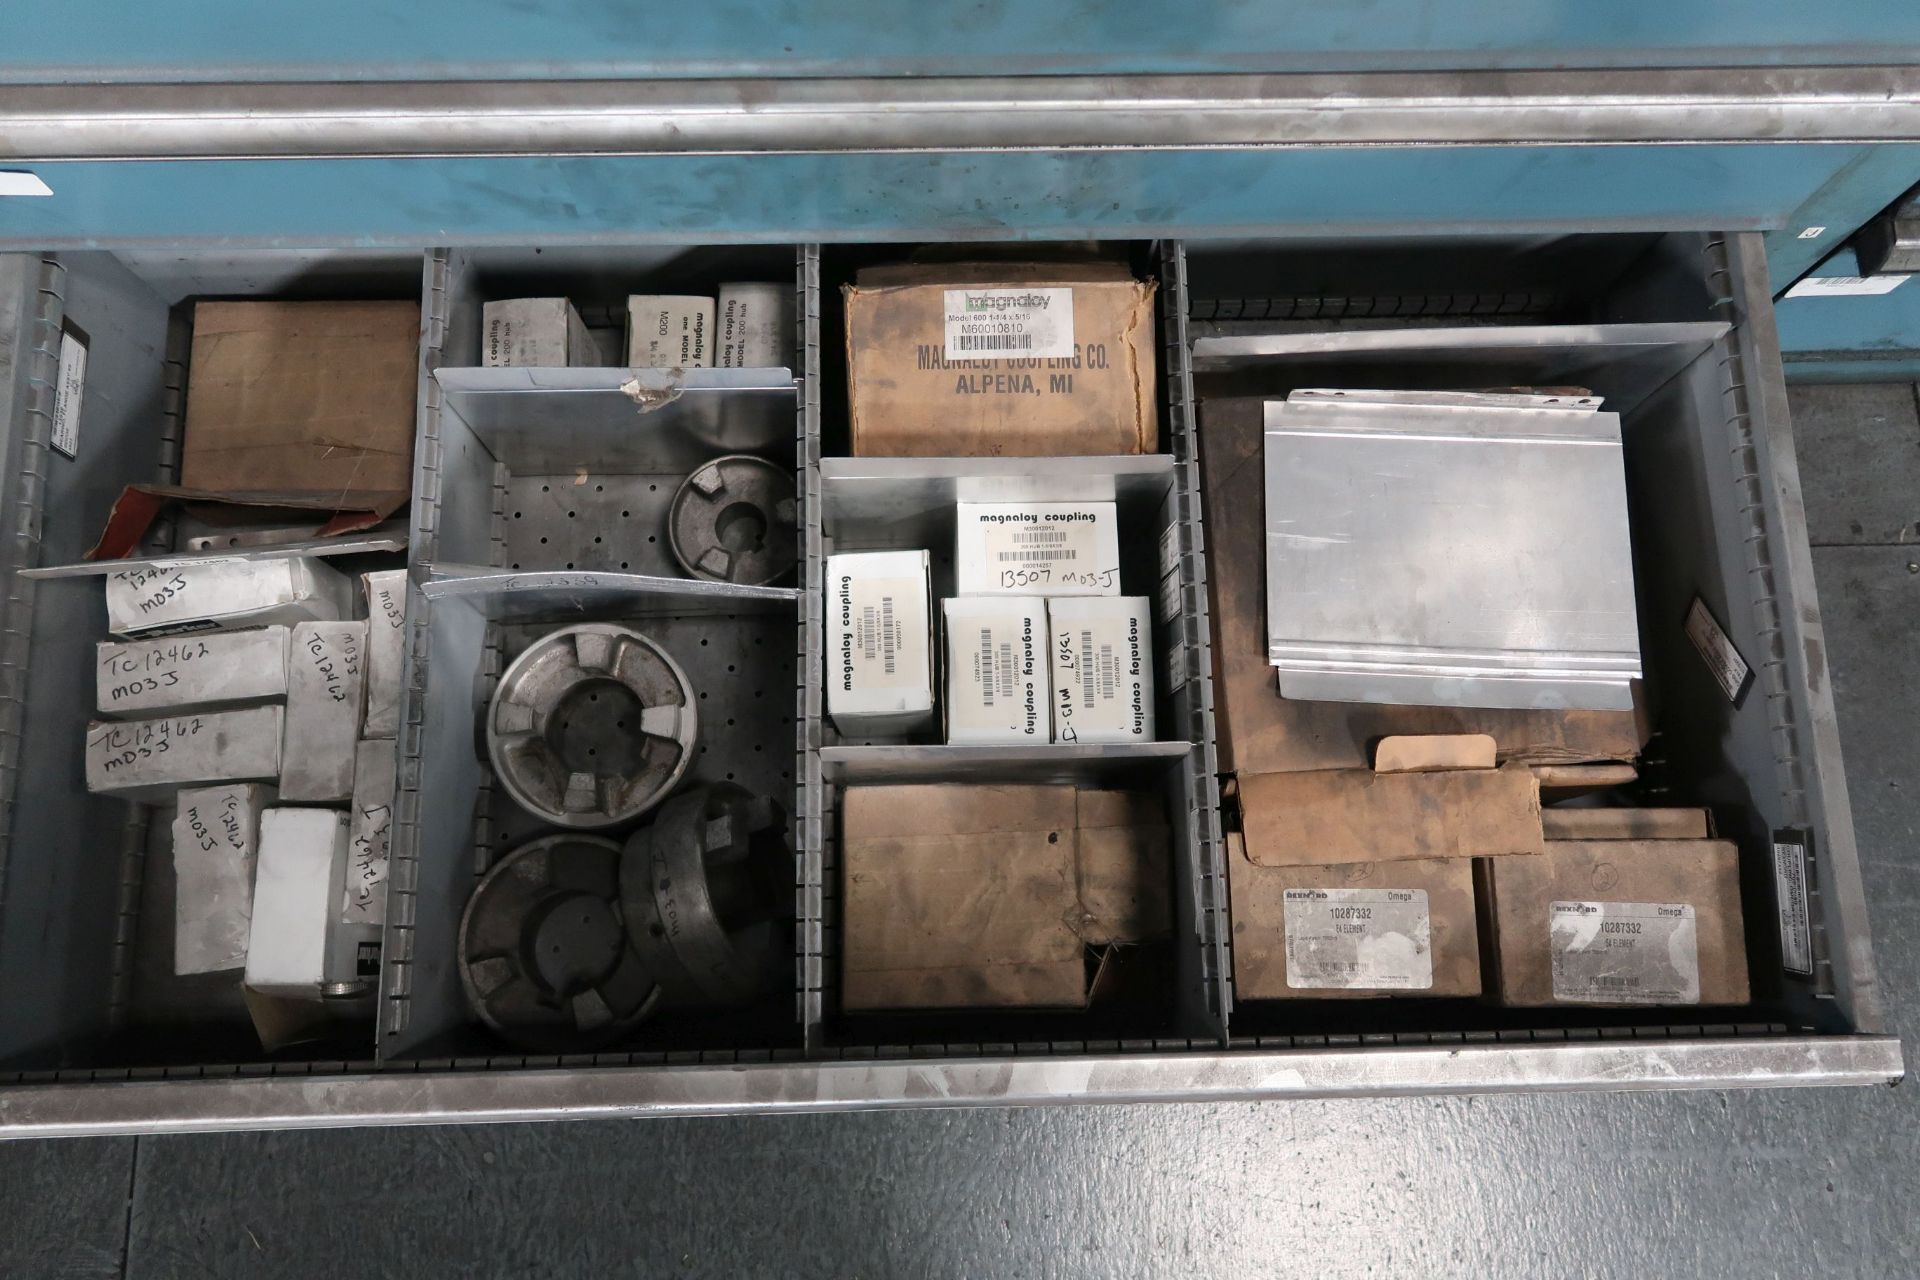 TOOLING CABINETS WITH CONTENTS - MOSTLY MACHINE PARTS **LOADING PRICE DUE TO ERRA - $2,000.00** - Image 21 of 59